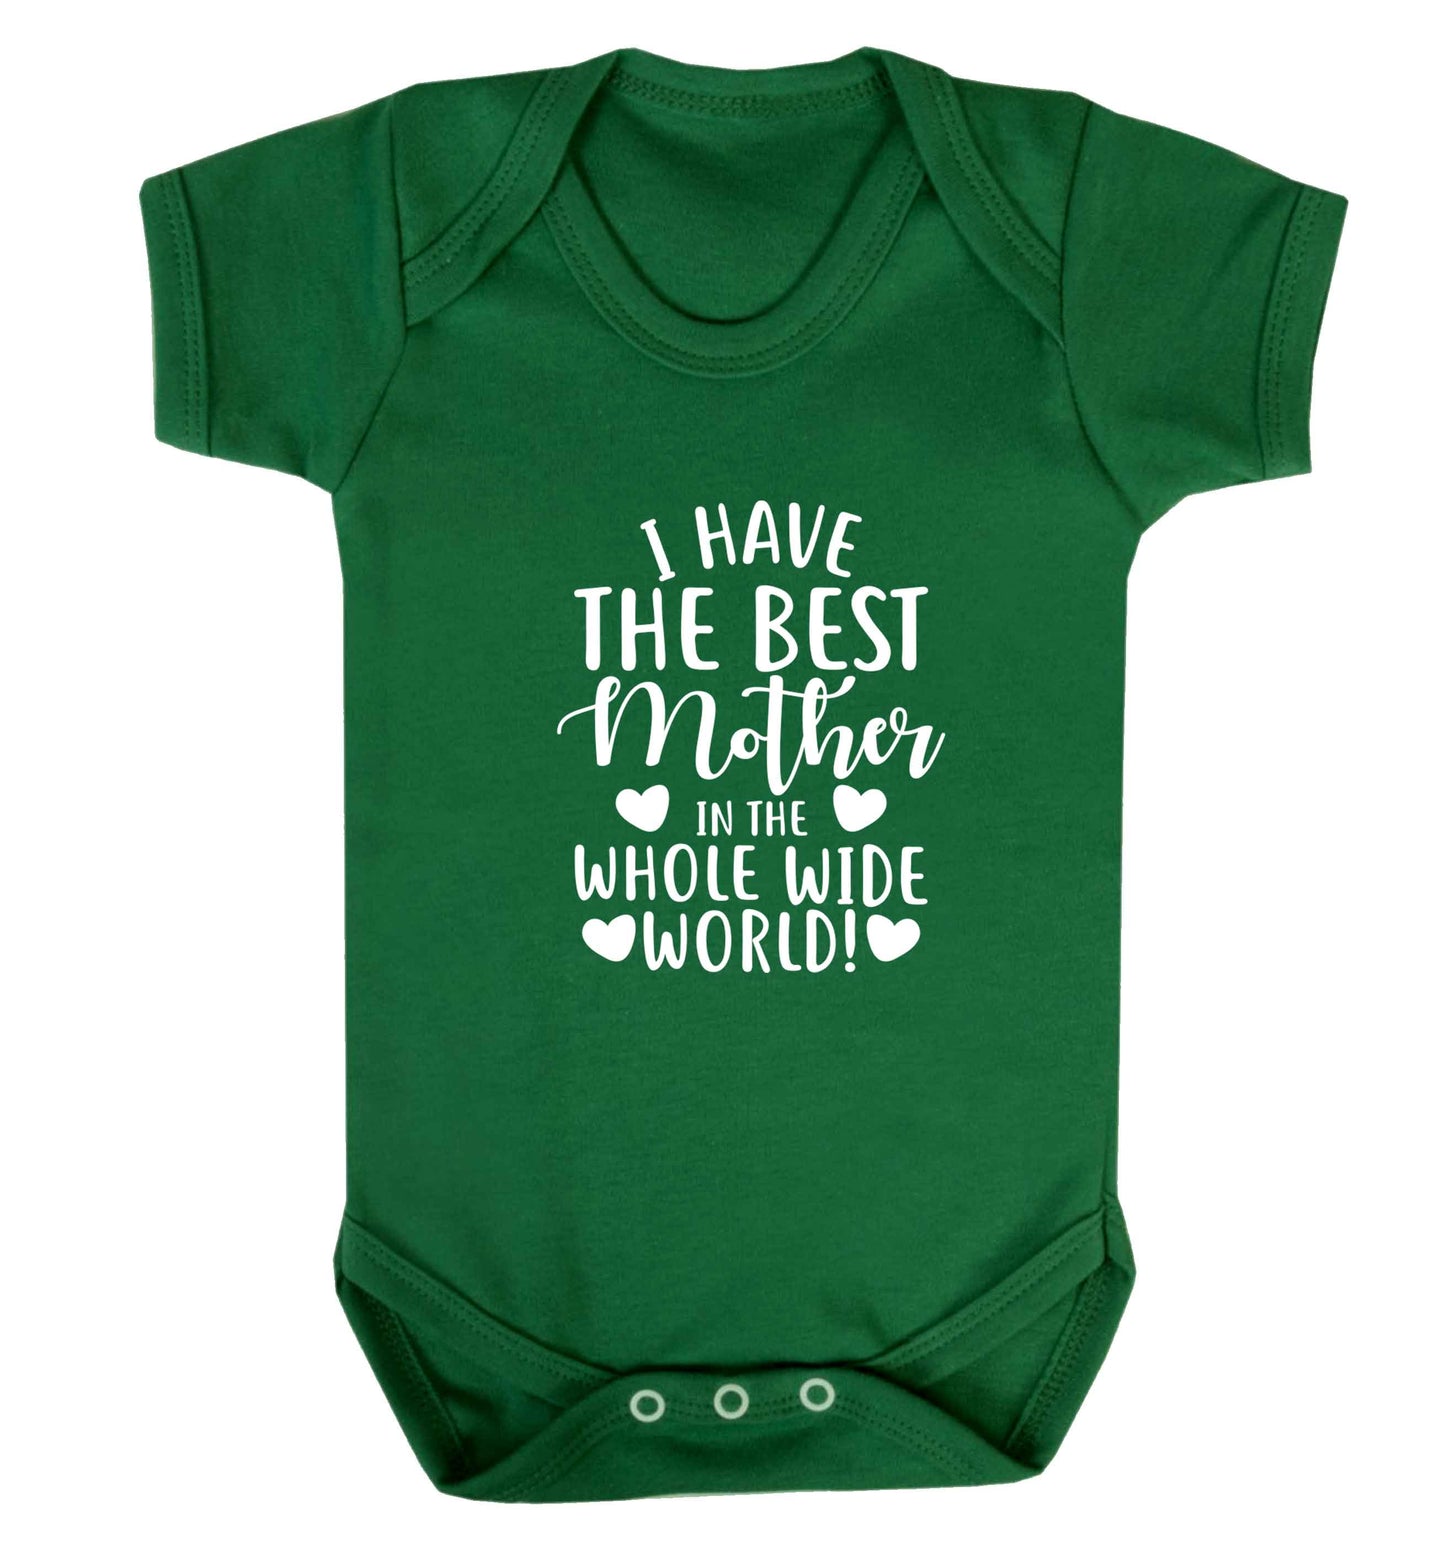 I have the best mother in the whole wide world baby vest green 18-24 months